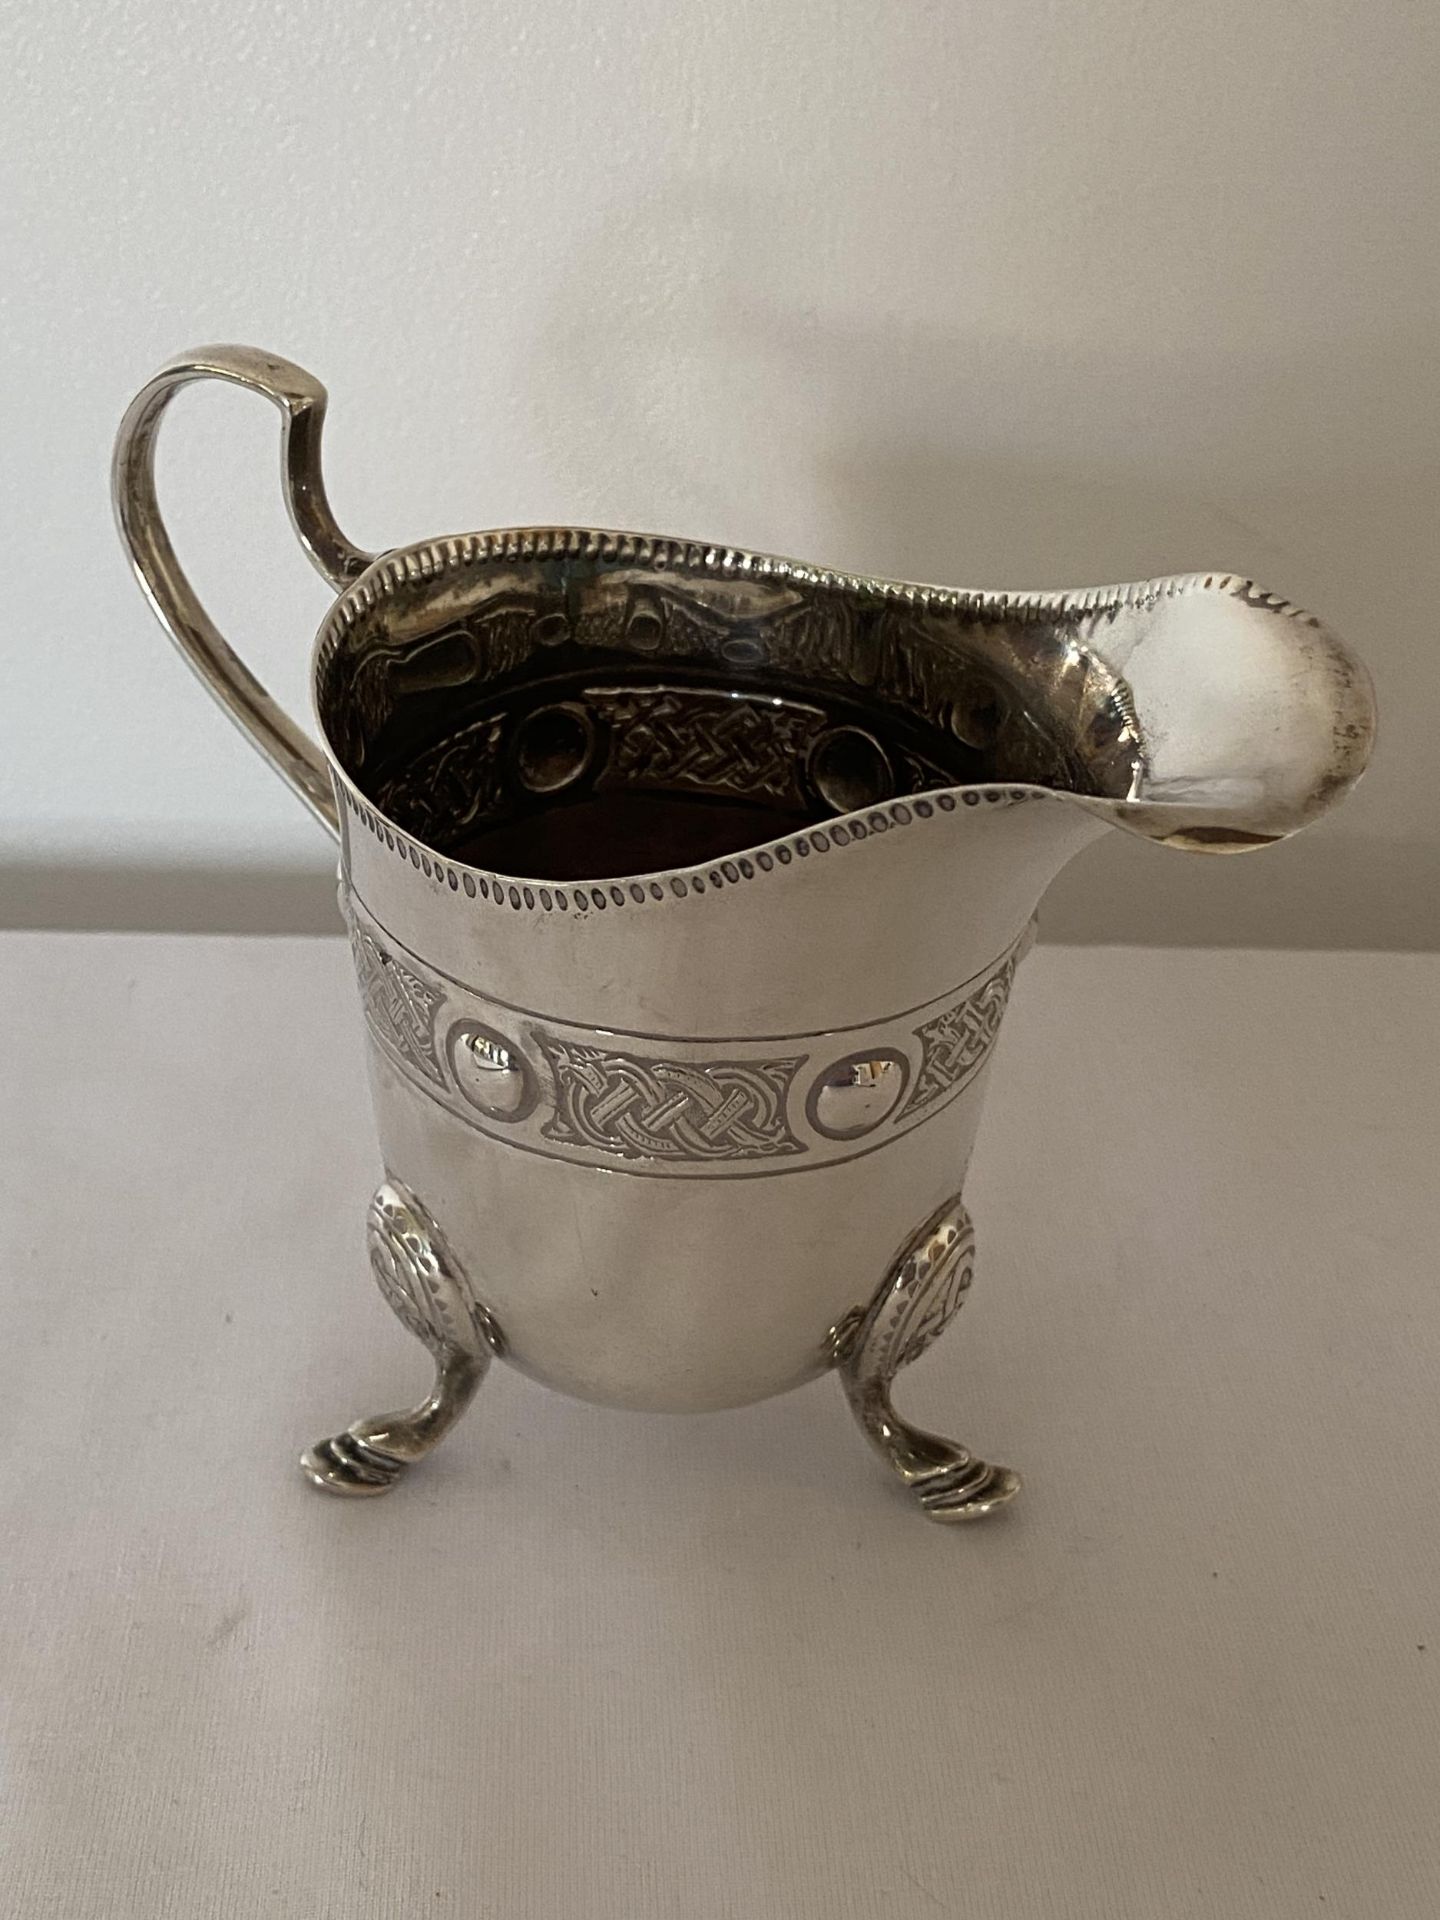 A GEORGE V 1917 HALLMARKED DUBLIN SILVER TANKARD, MAKER T WEIR & SONS, GROSS WEIGHT 163 GRAMS - Image 5 of 12